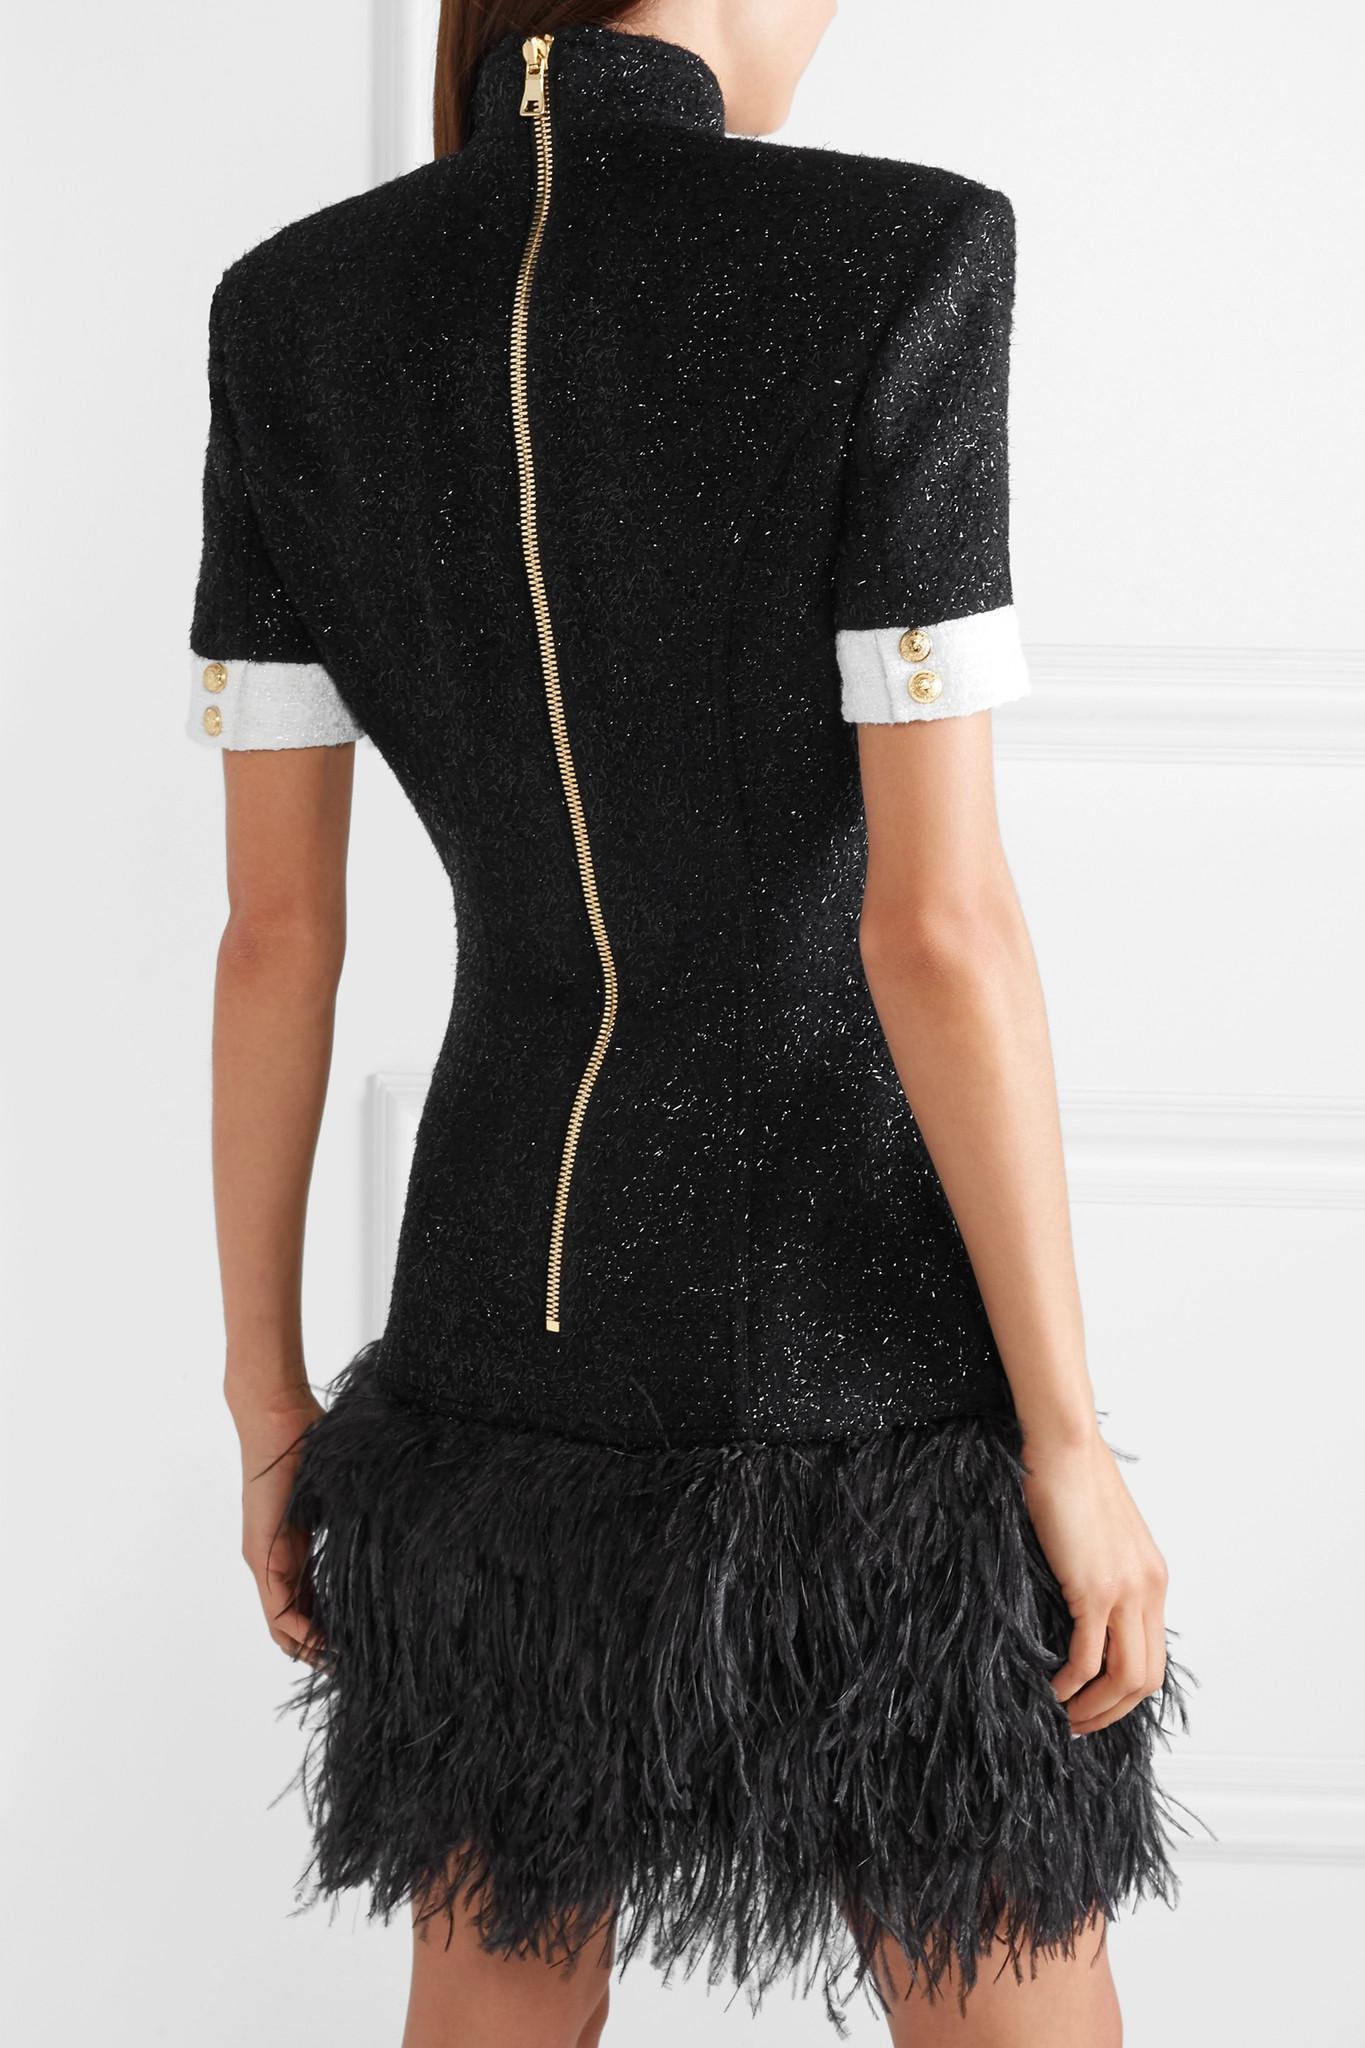 Rate the Dress: Pierre Balmain does ostrich feathers - The Dreamstress